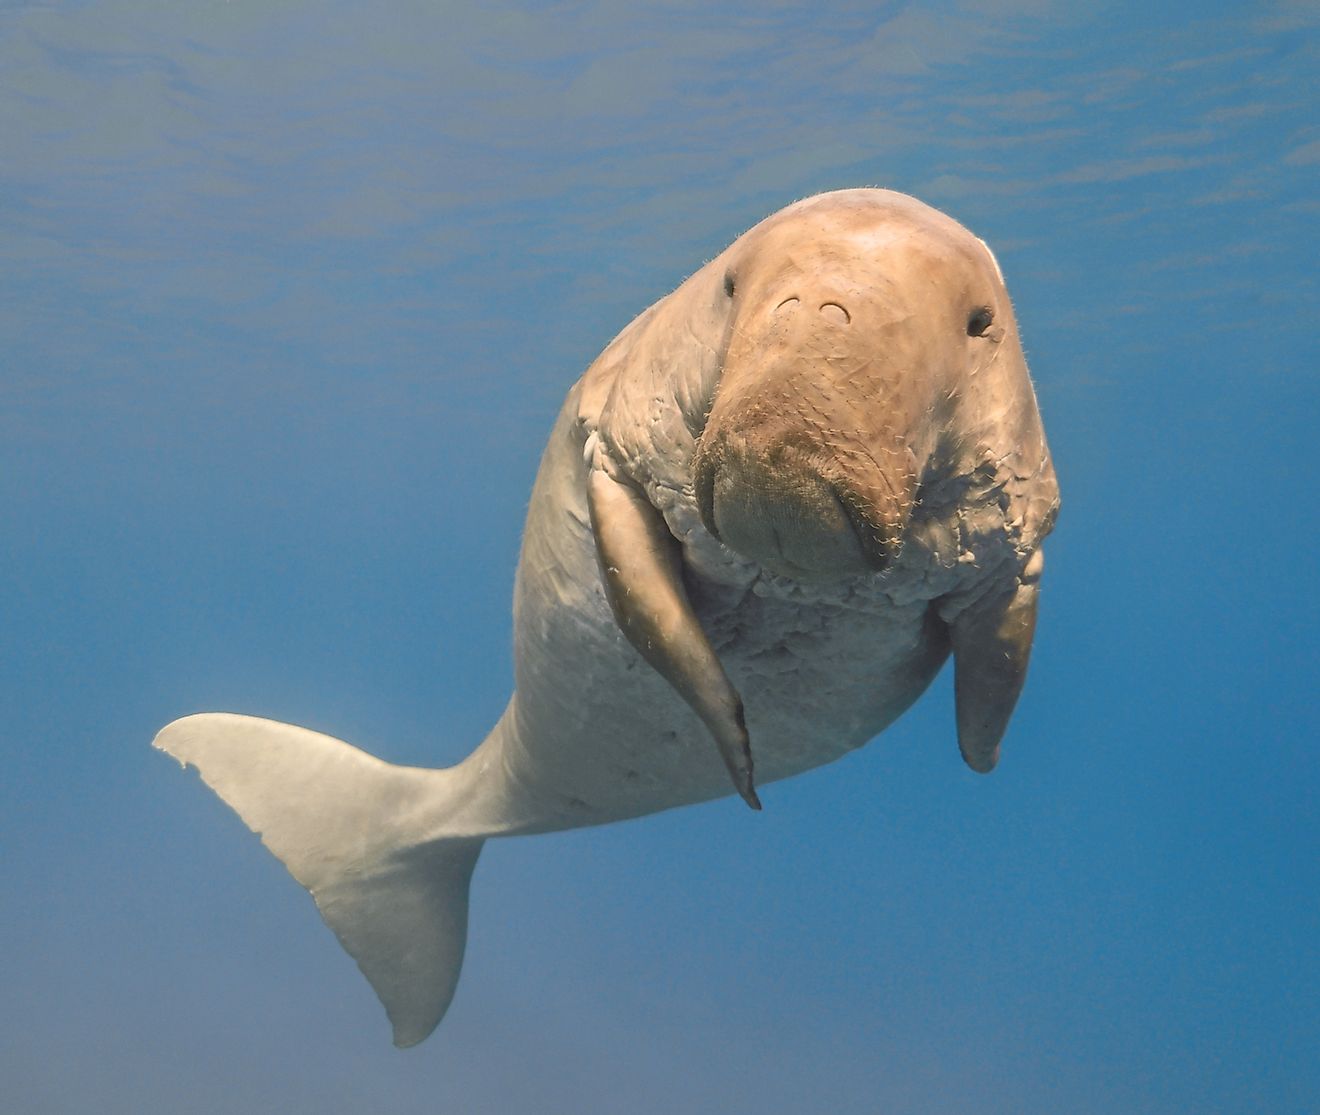 Dugong dugon (seacow or sea cow) swimming in the tropical sea water. Image credit: vkilikov/Shutterstock.com